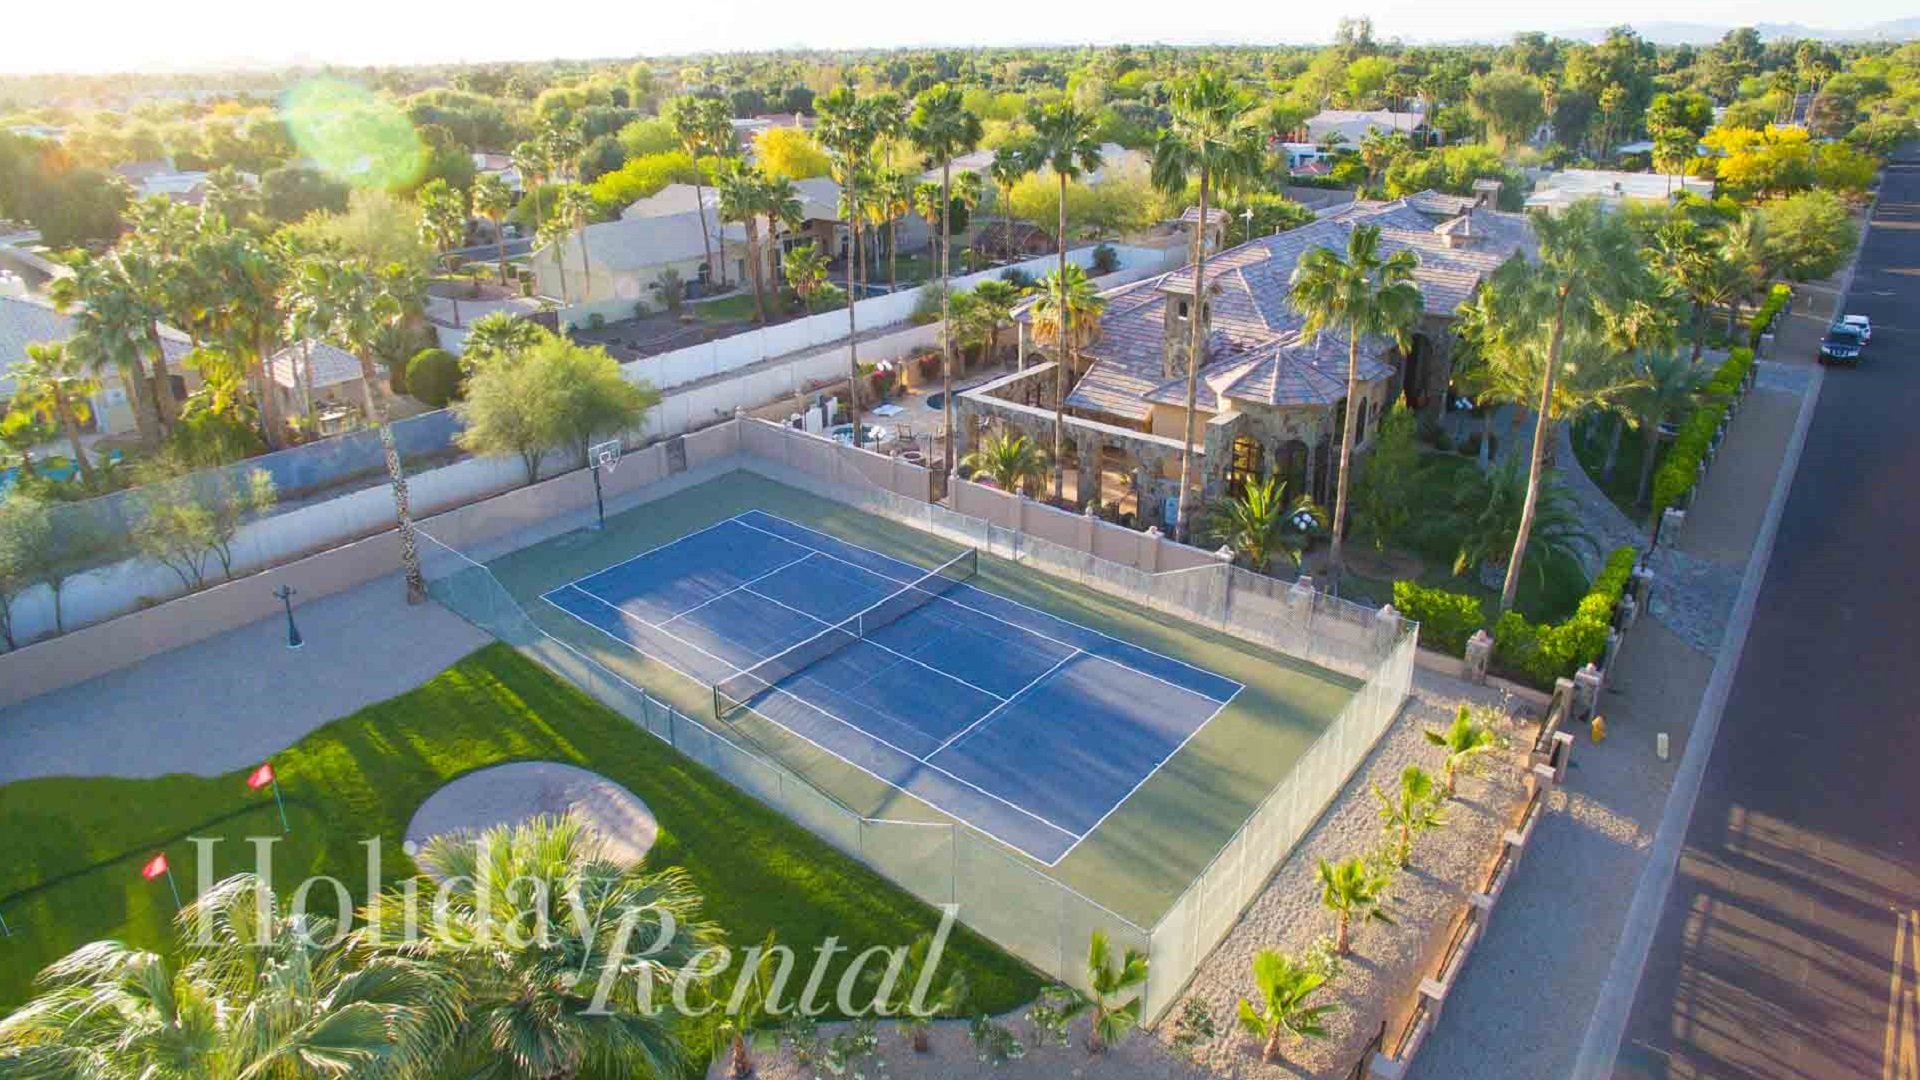 Aerial view of property and amenities